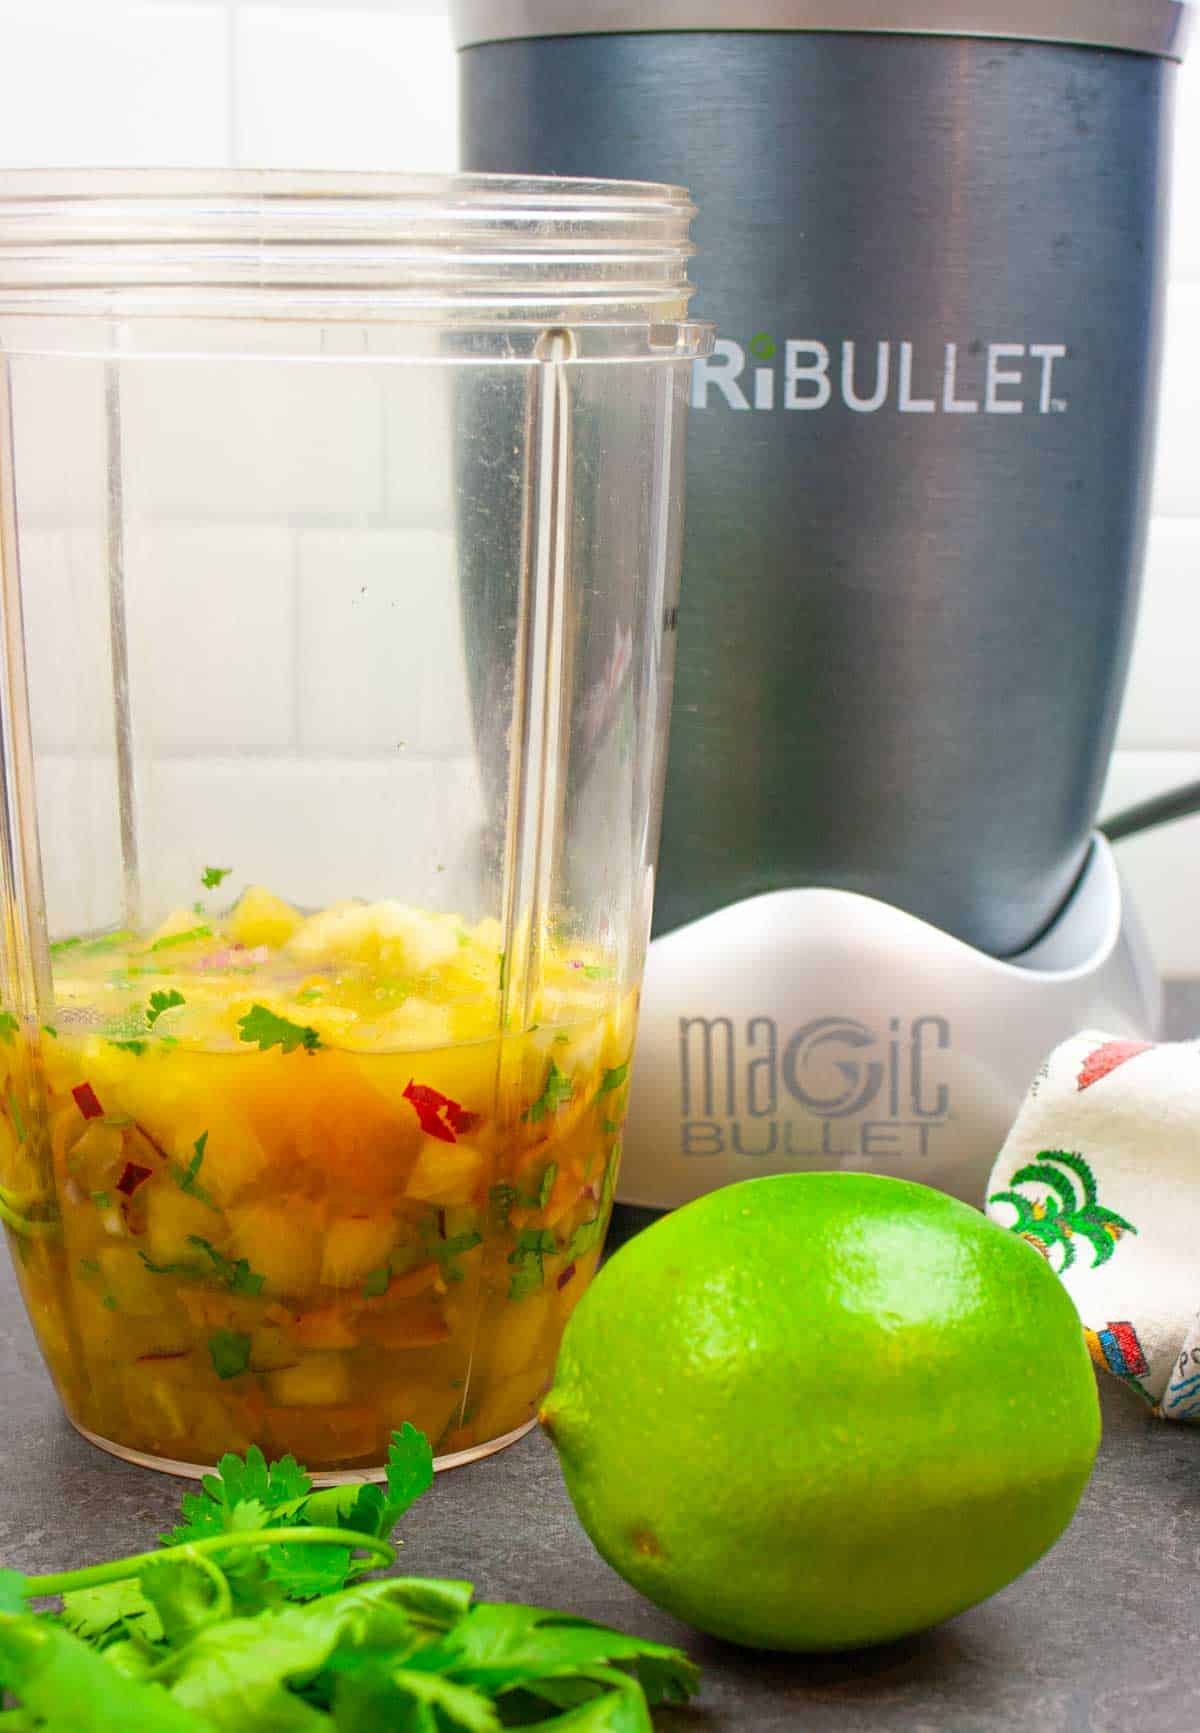 Sauce ingredients in a Nutribullet cup with blender ready to blend.